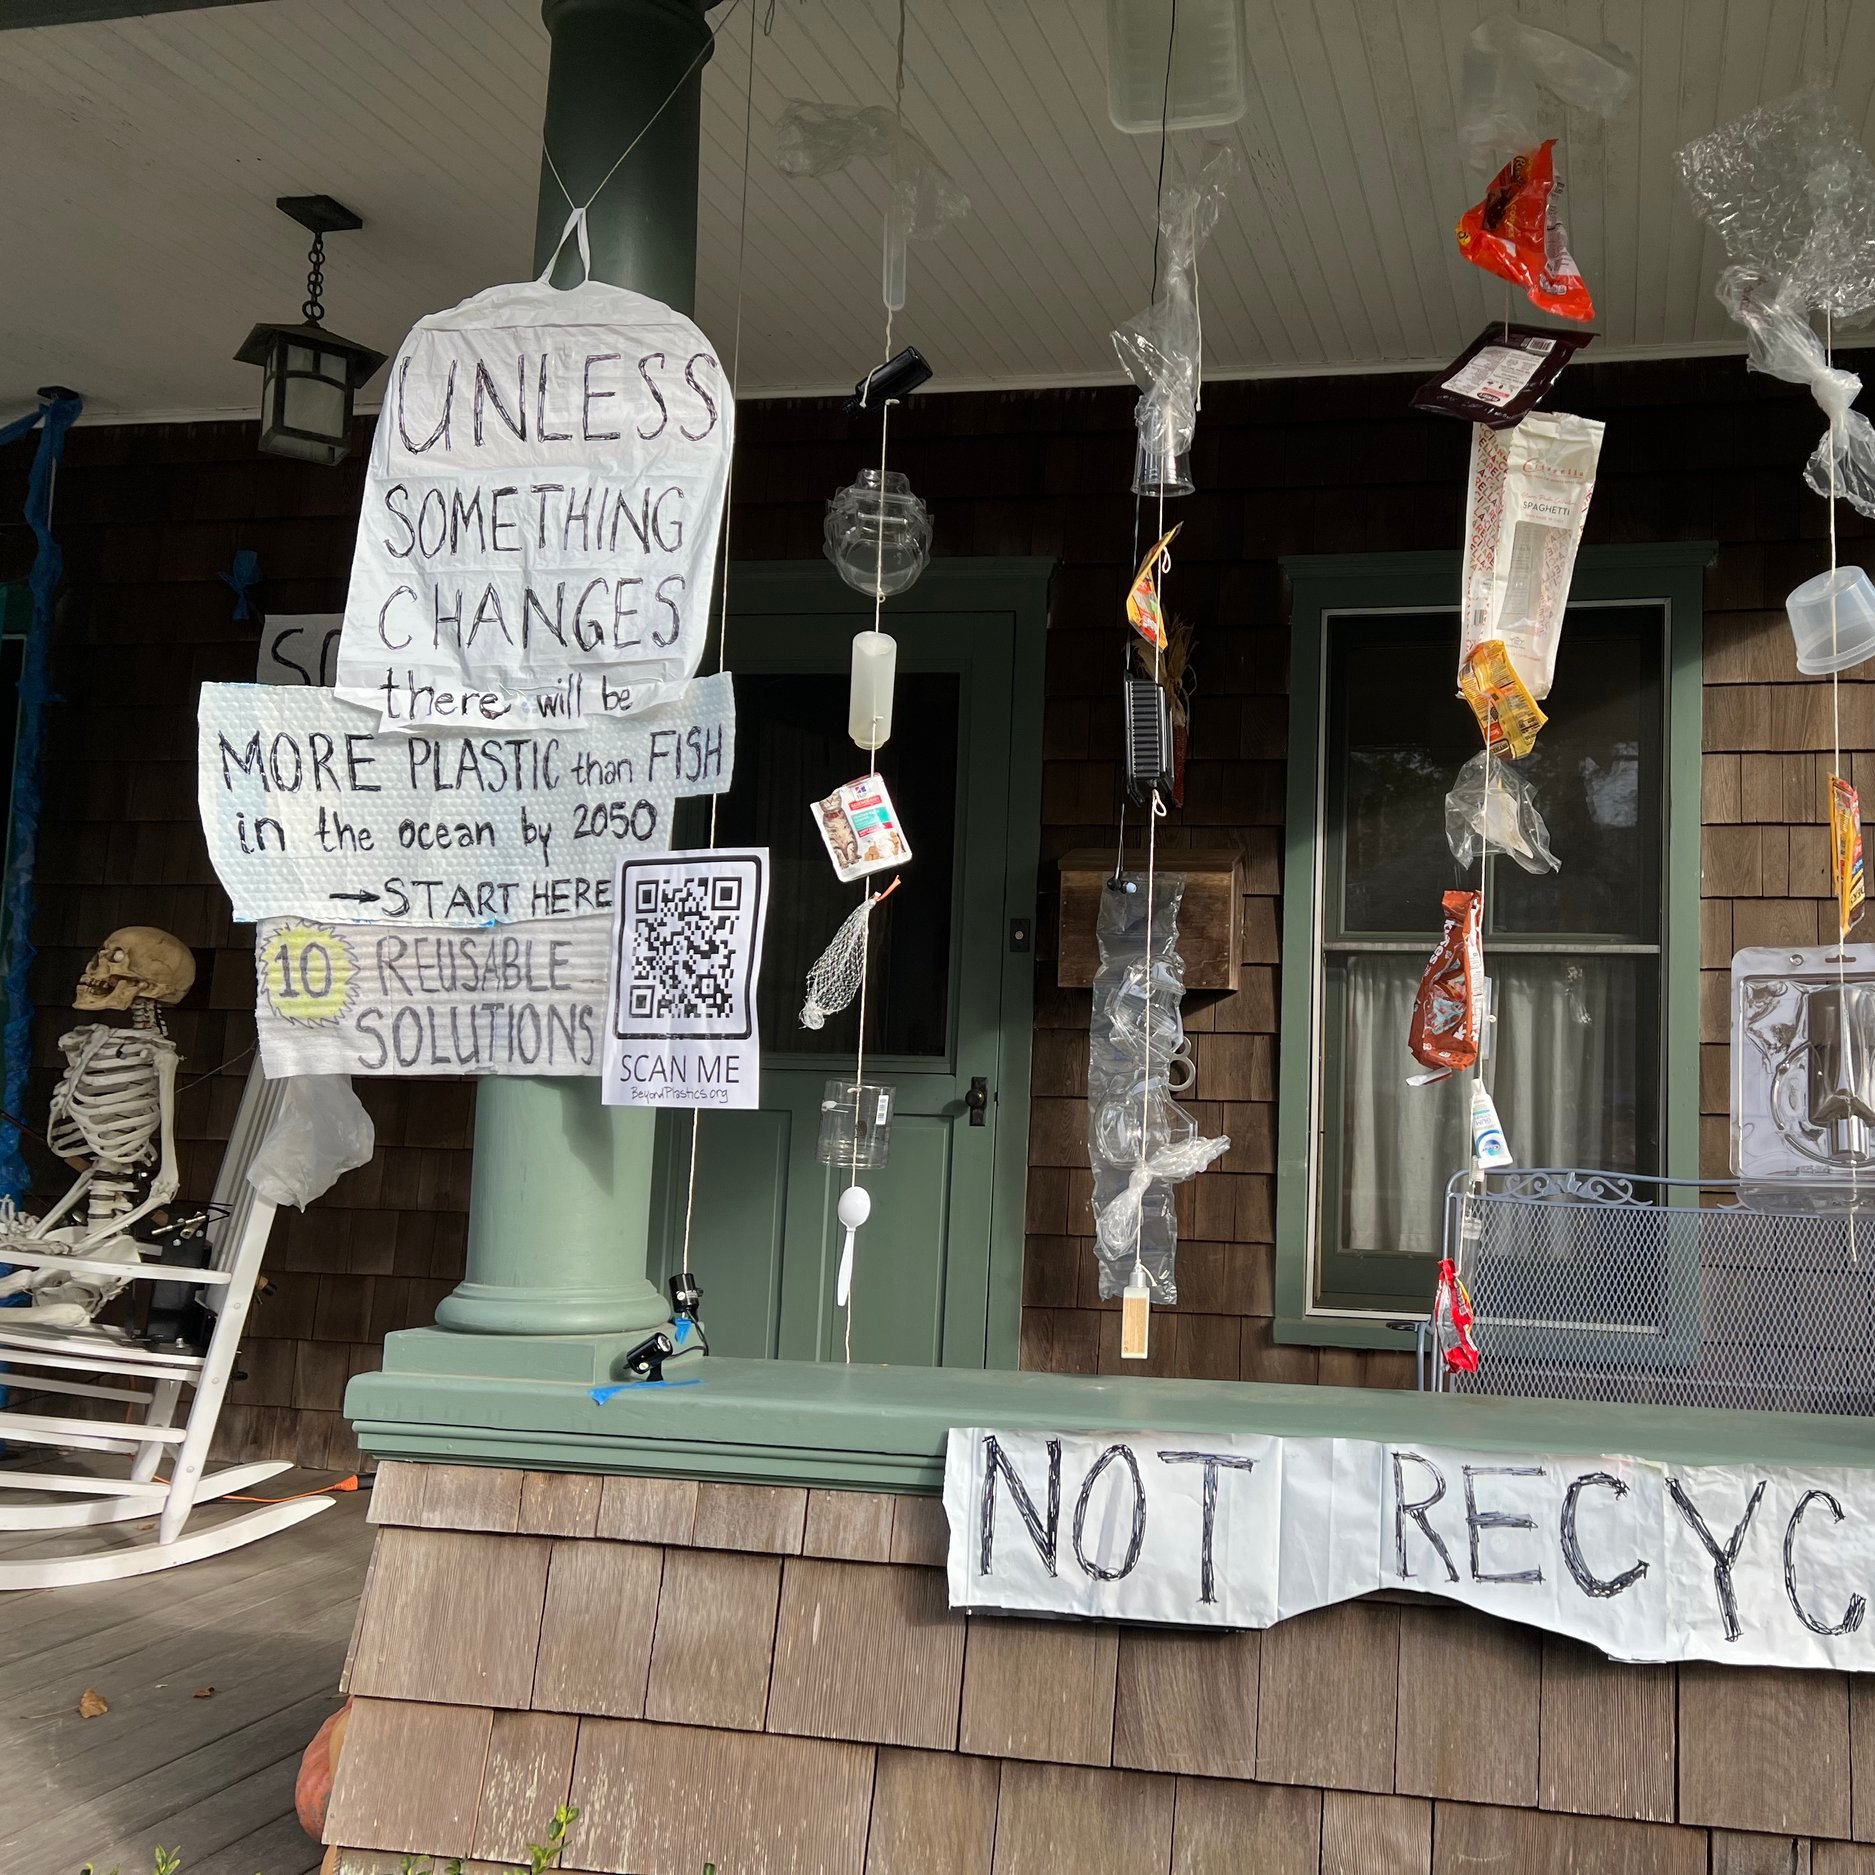 👻Haunted By Plastic Waste in East Hampton, NY🥤 